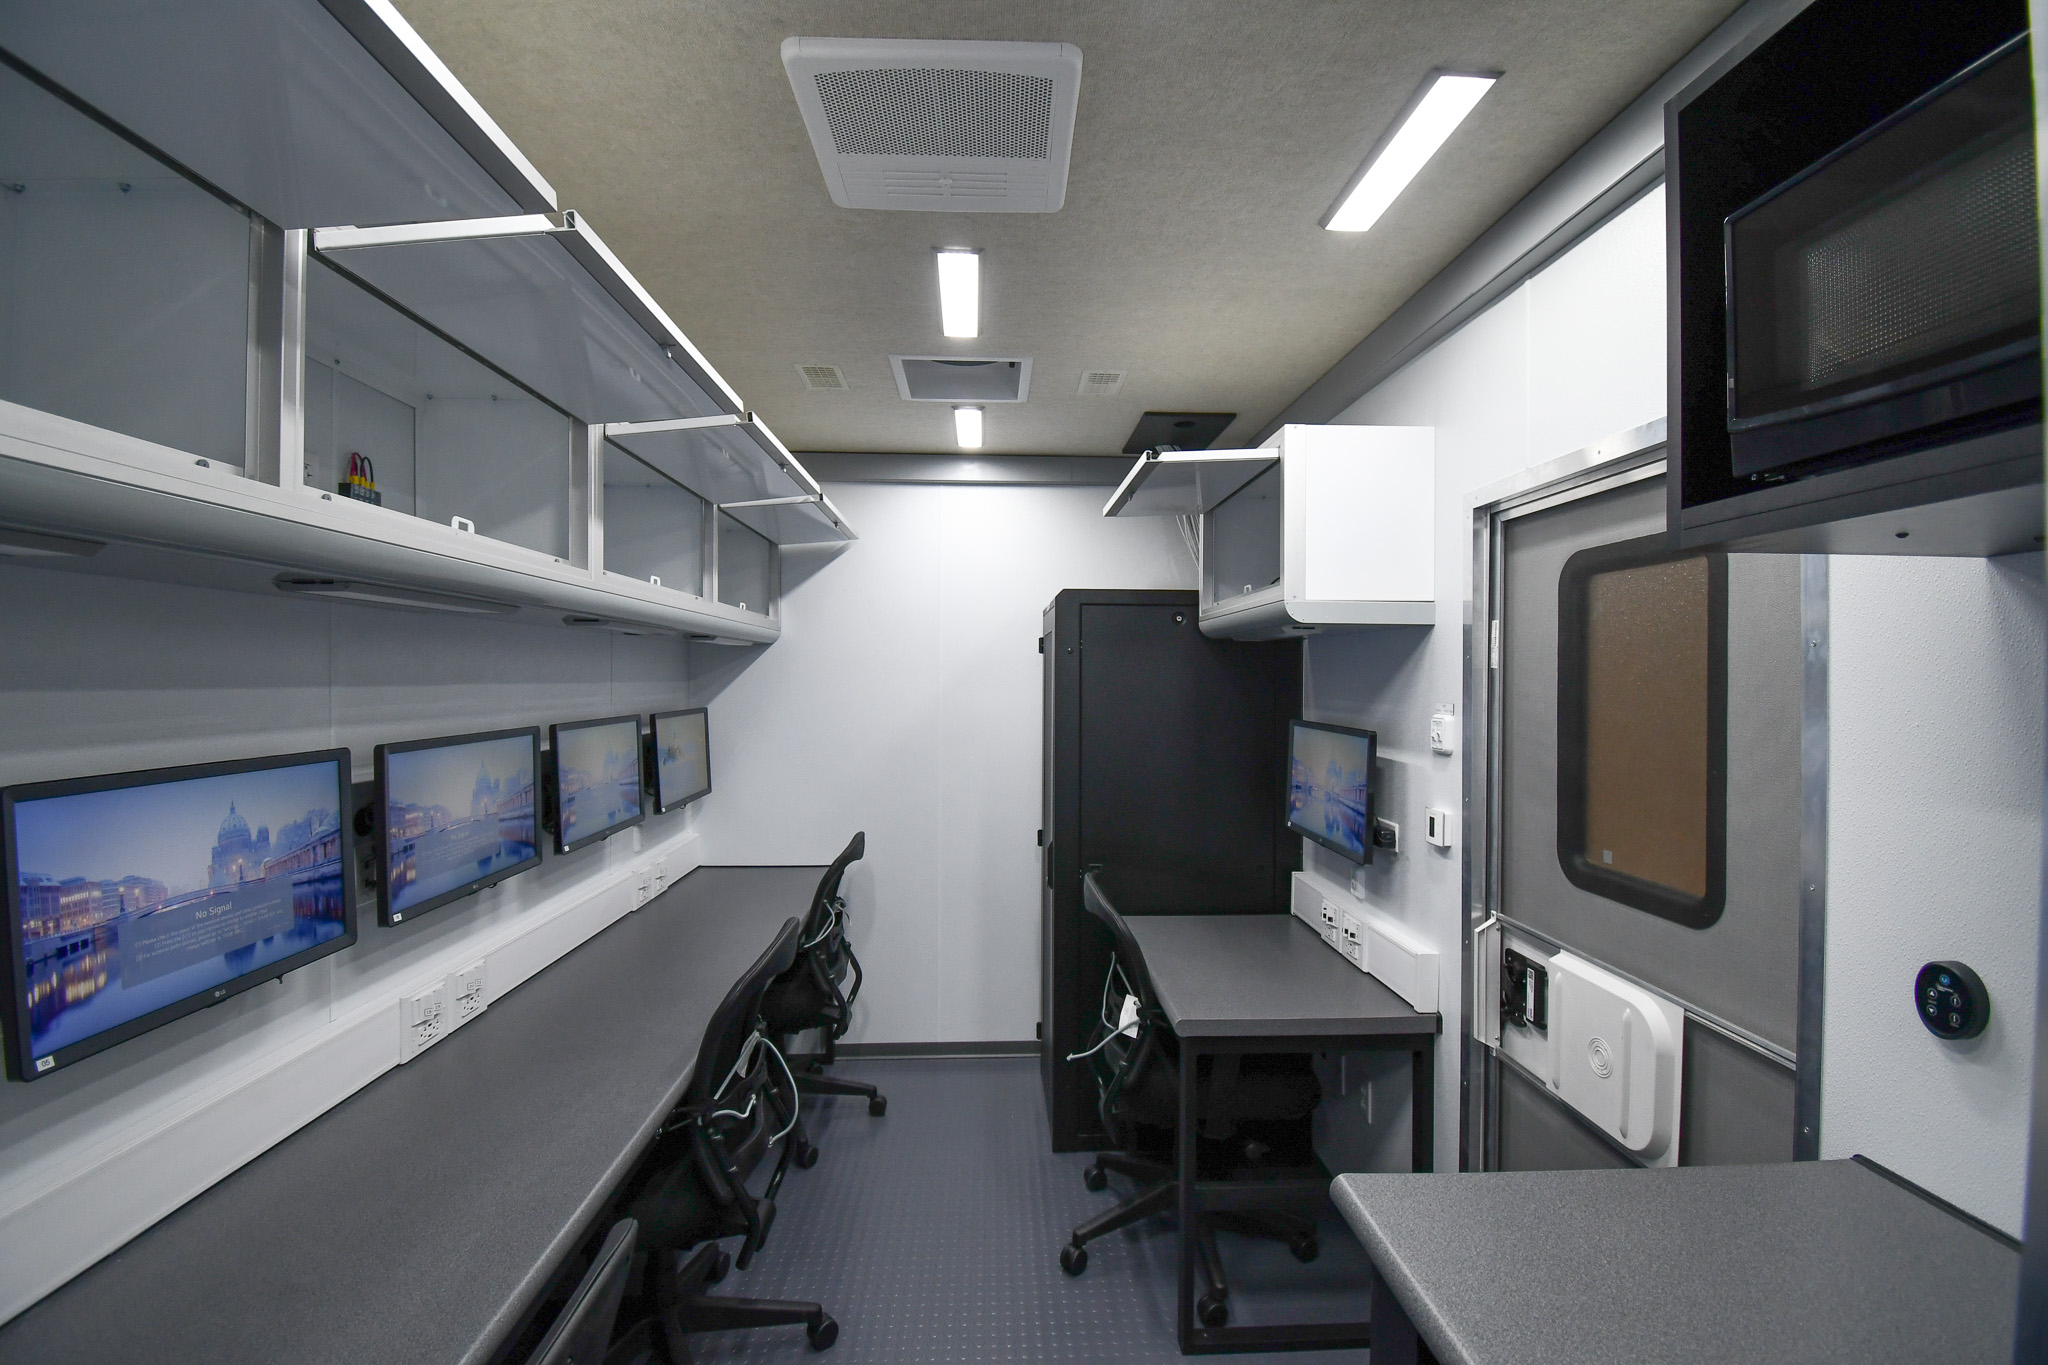 A view of the three workstations, kitchenette, and electronics rack cabinet inside the unit for Montgomery County, TN.